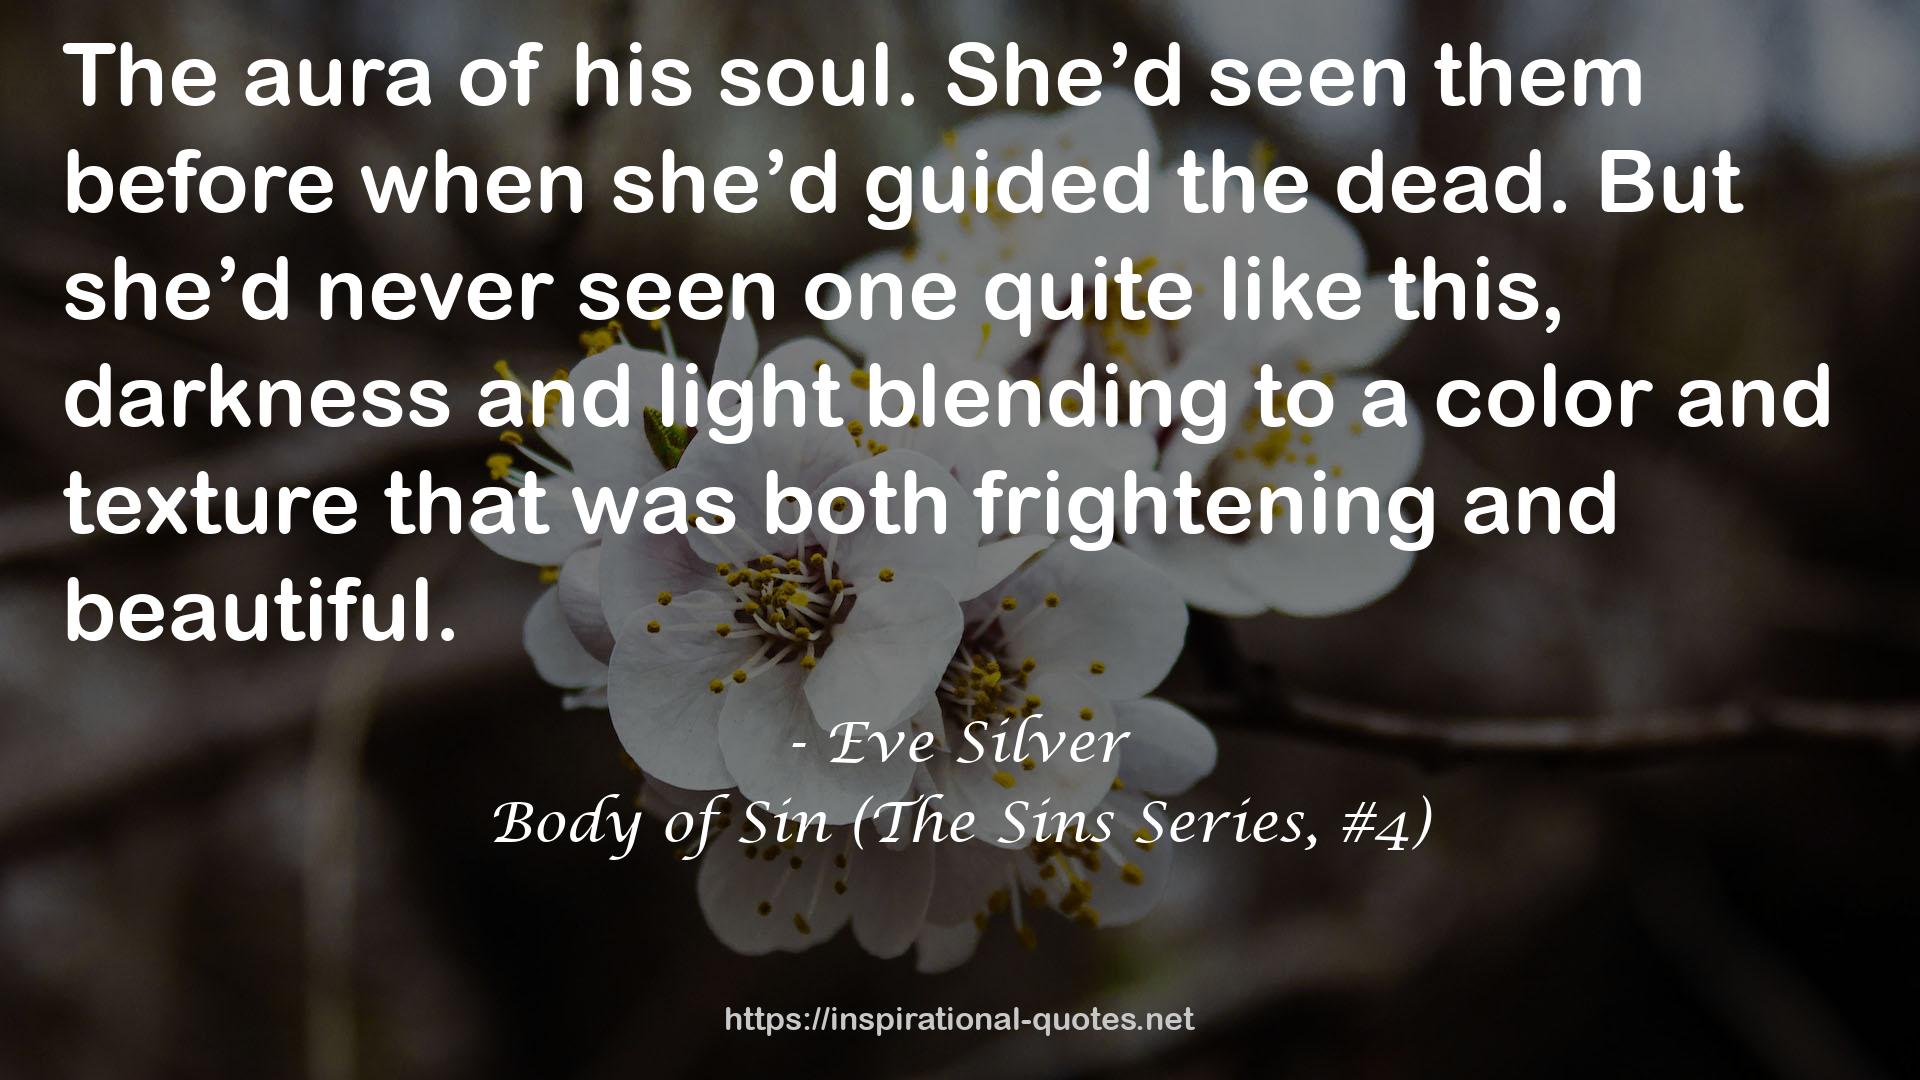 Body of Sin (The Sins Series, #4) QUOTES